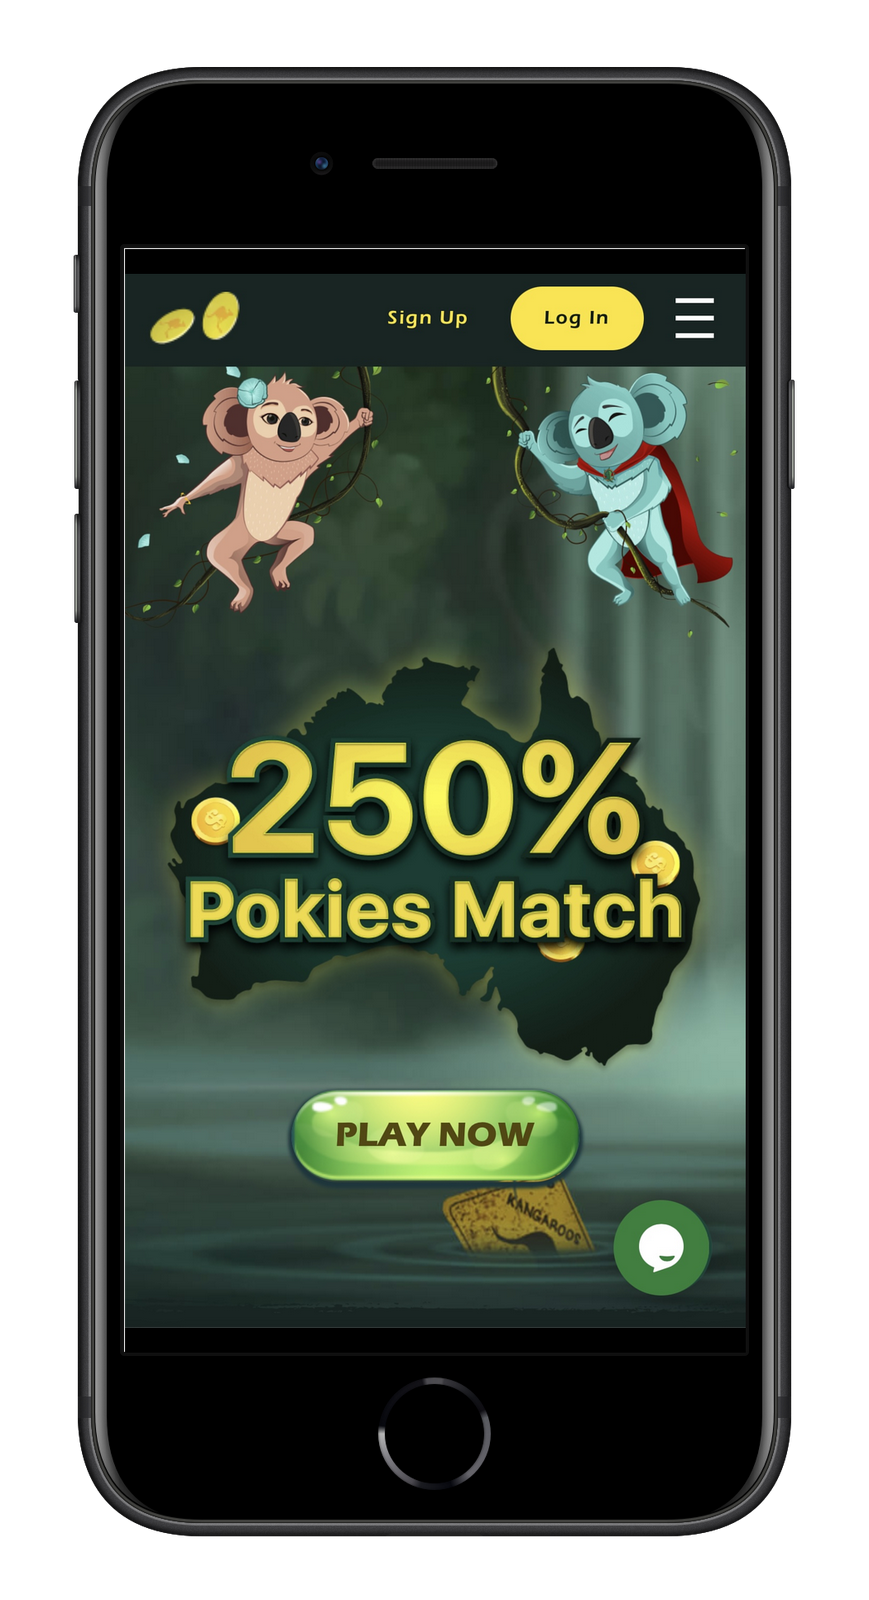 Games of chance in two up gambling game played on anzac day in australia